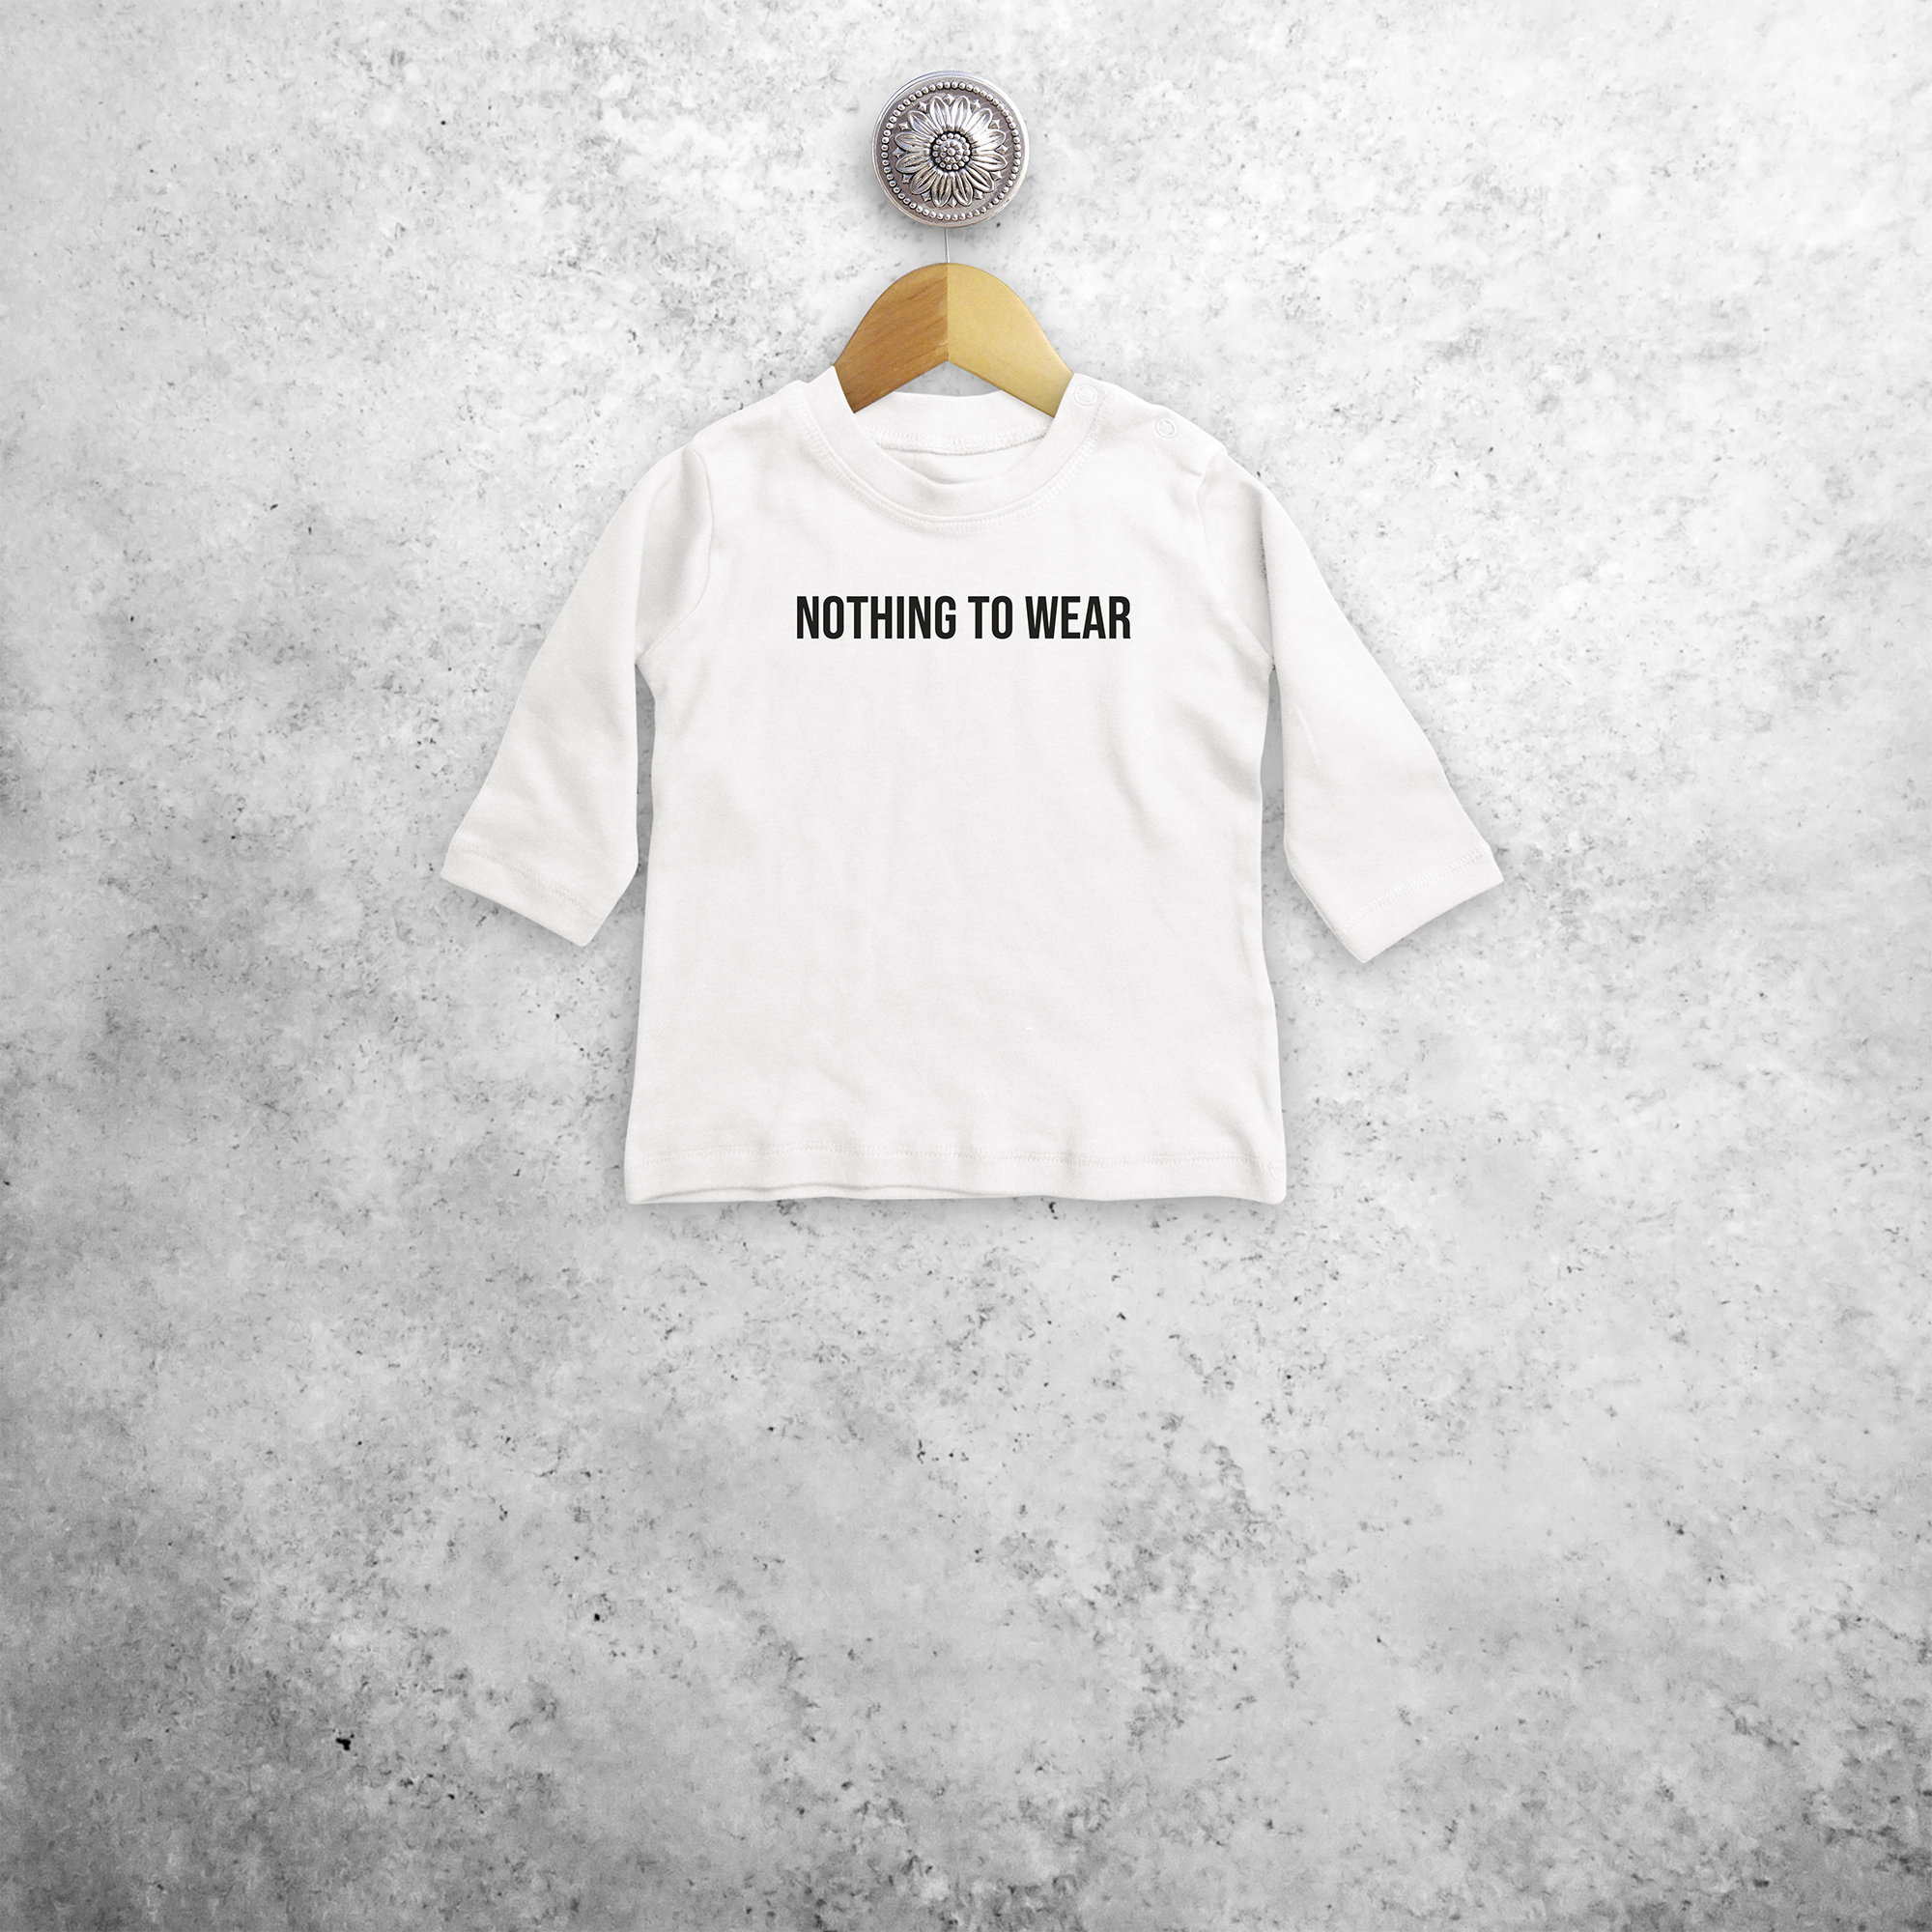 'Nothing to wear' baby longsleeve shirt